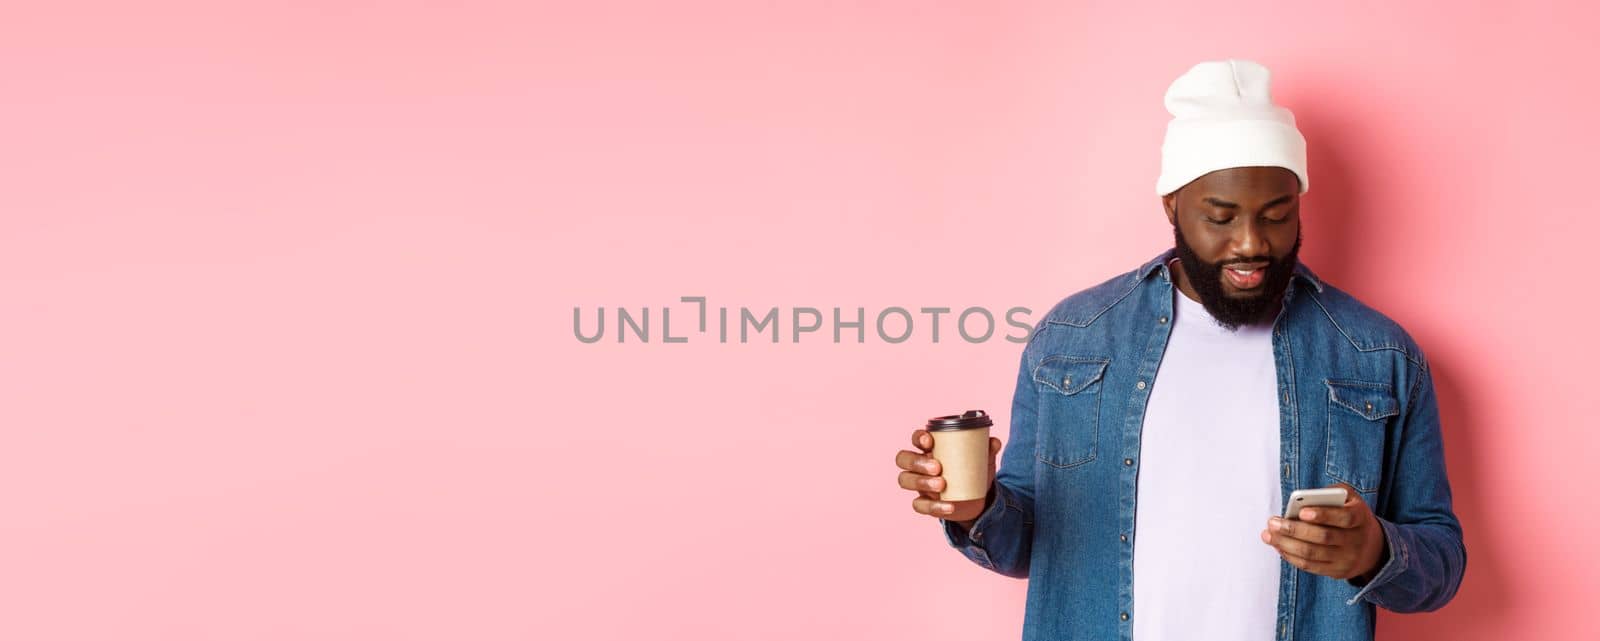 Image of stylish Black man hipster drinking takeaway coffee, reading message on phone, standing over pink background.